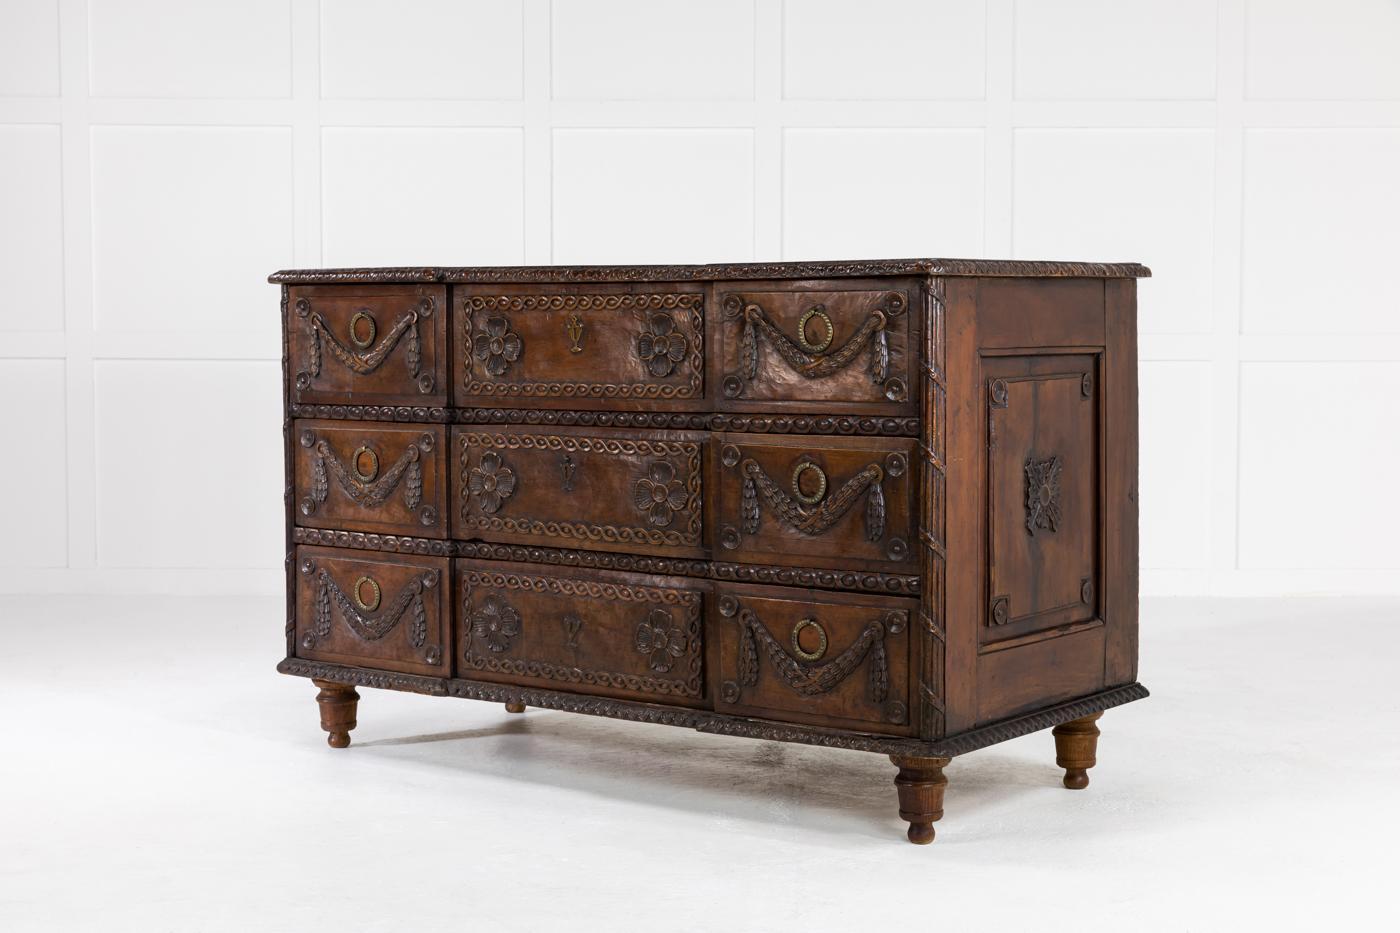 Wonderfully carved 18th century, rustic, cherry commode of well balanced proportions and has fantastic patina.